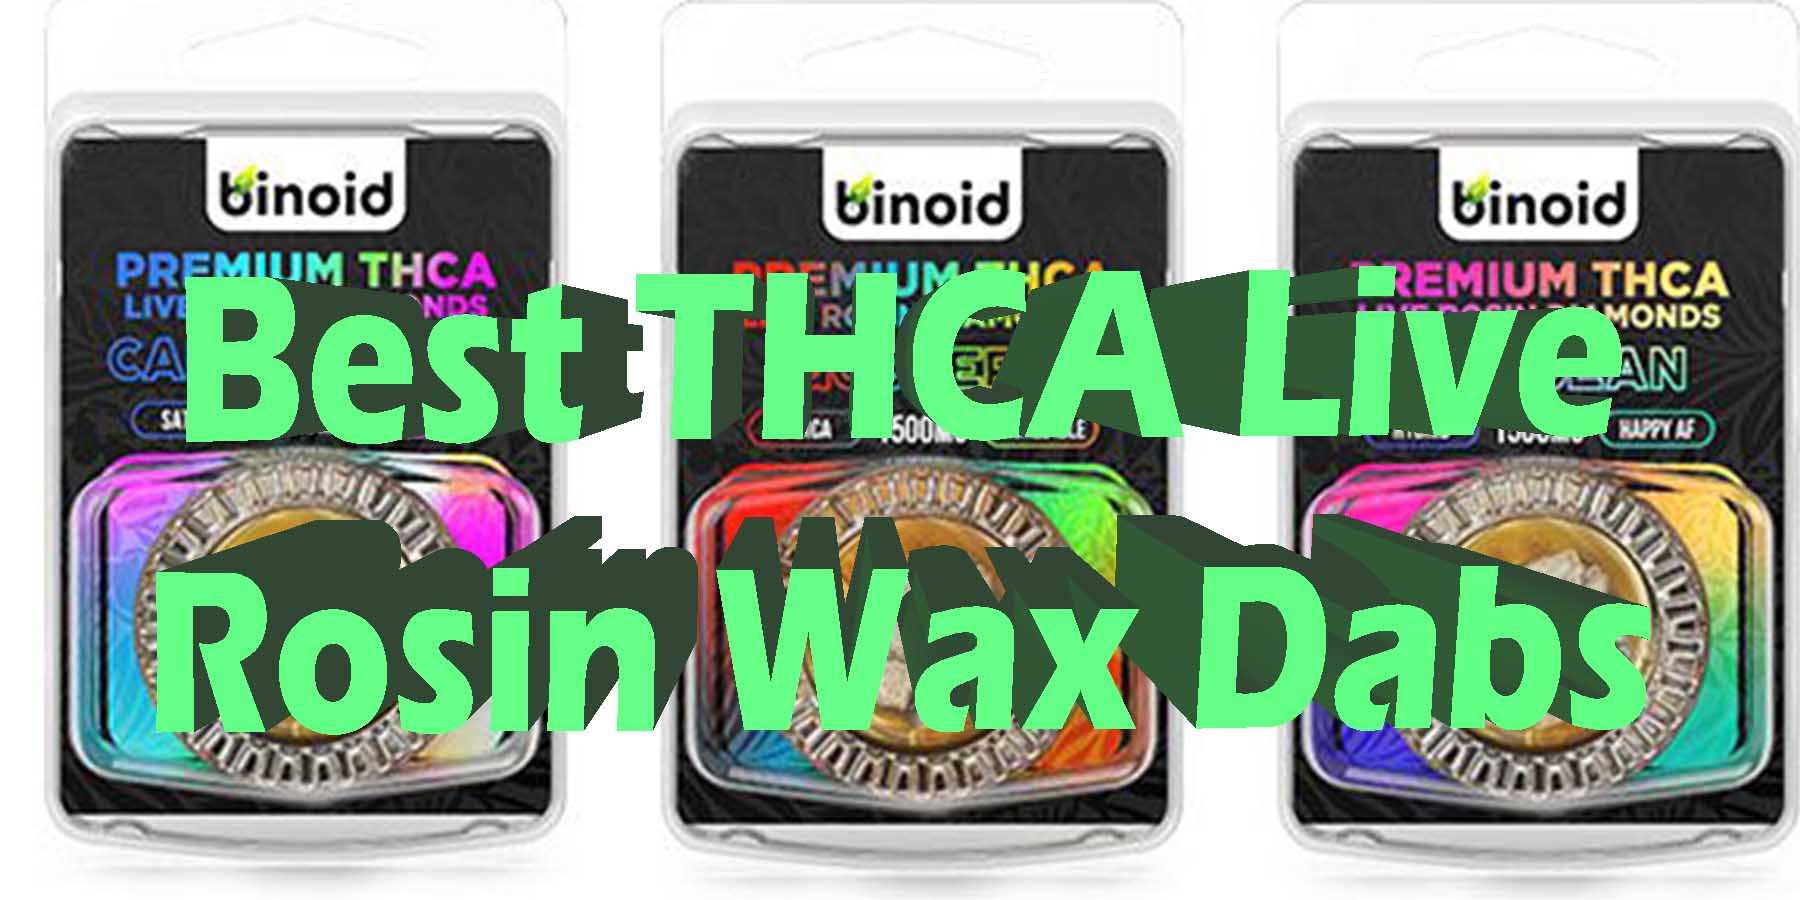 Best THCA Live Rosin Wax Dabs WhereToGet HowToGetNearMe BestPlace LowestPrice Coupon Discount For Smoking Best High Smoke Shop Online Near Me Binoid